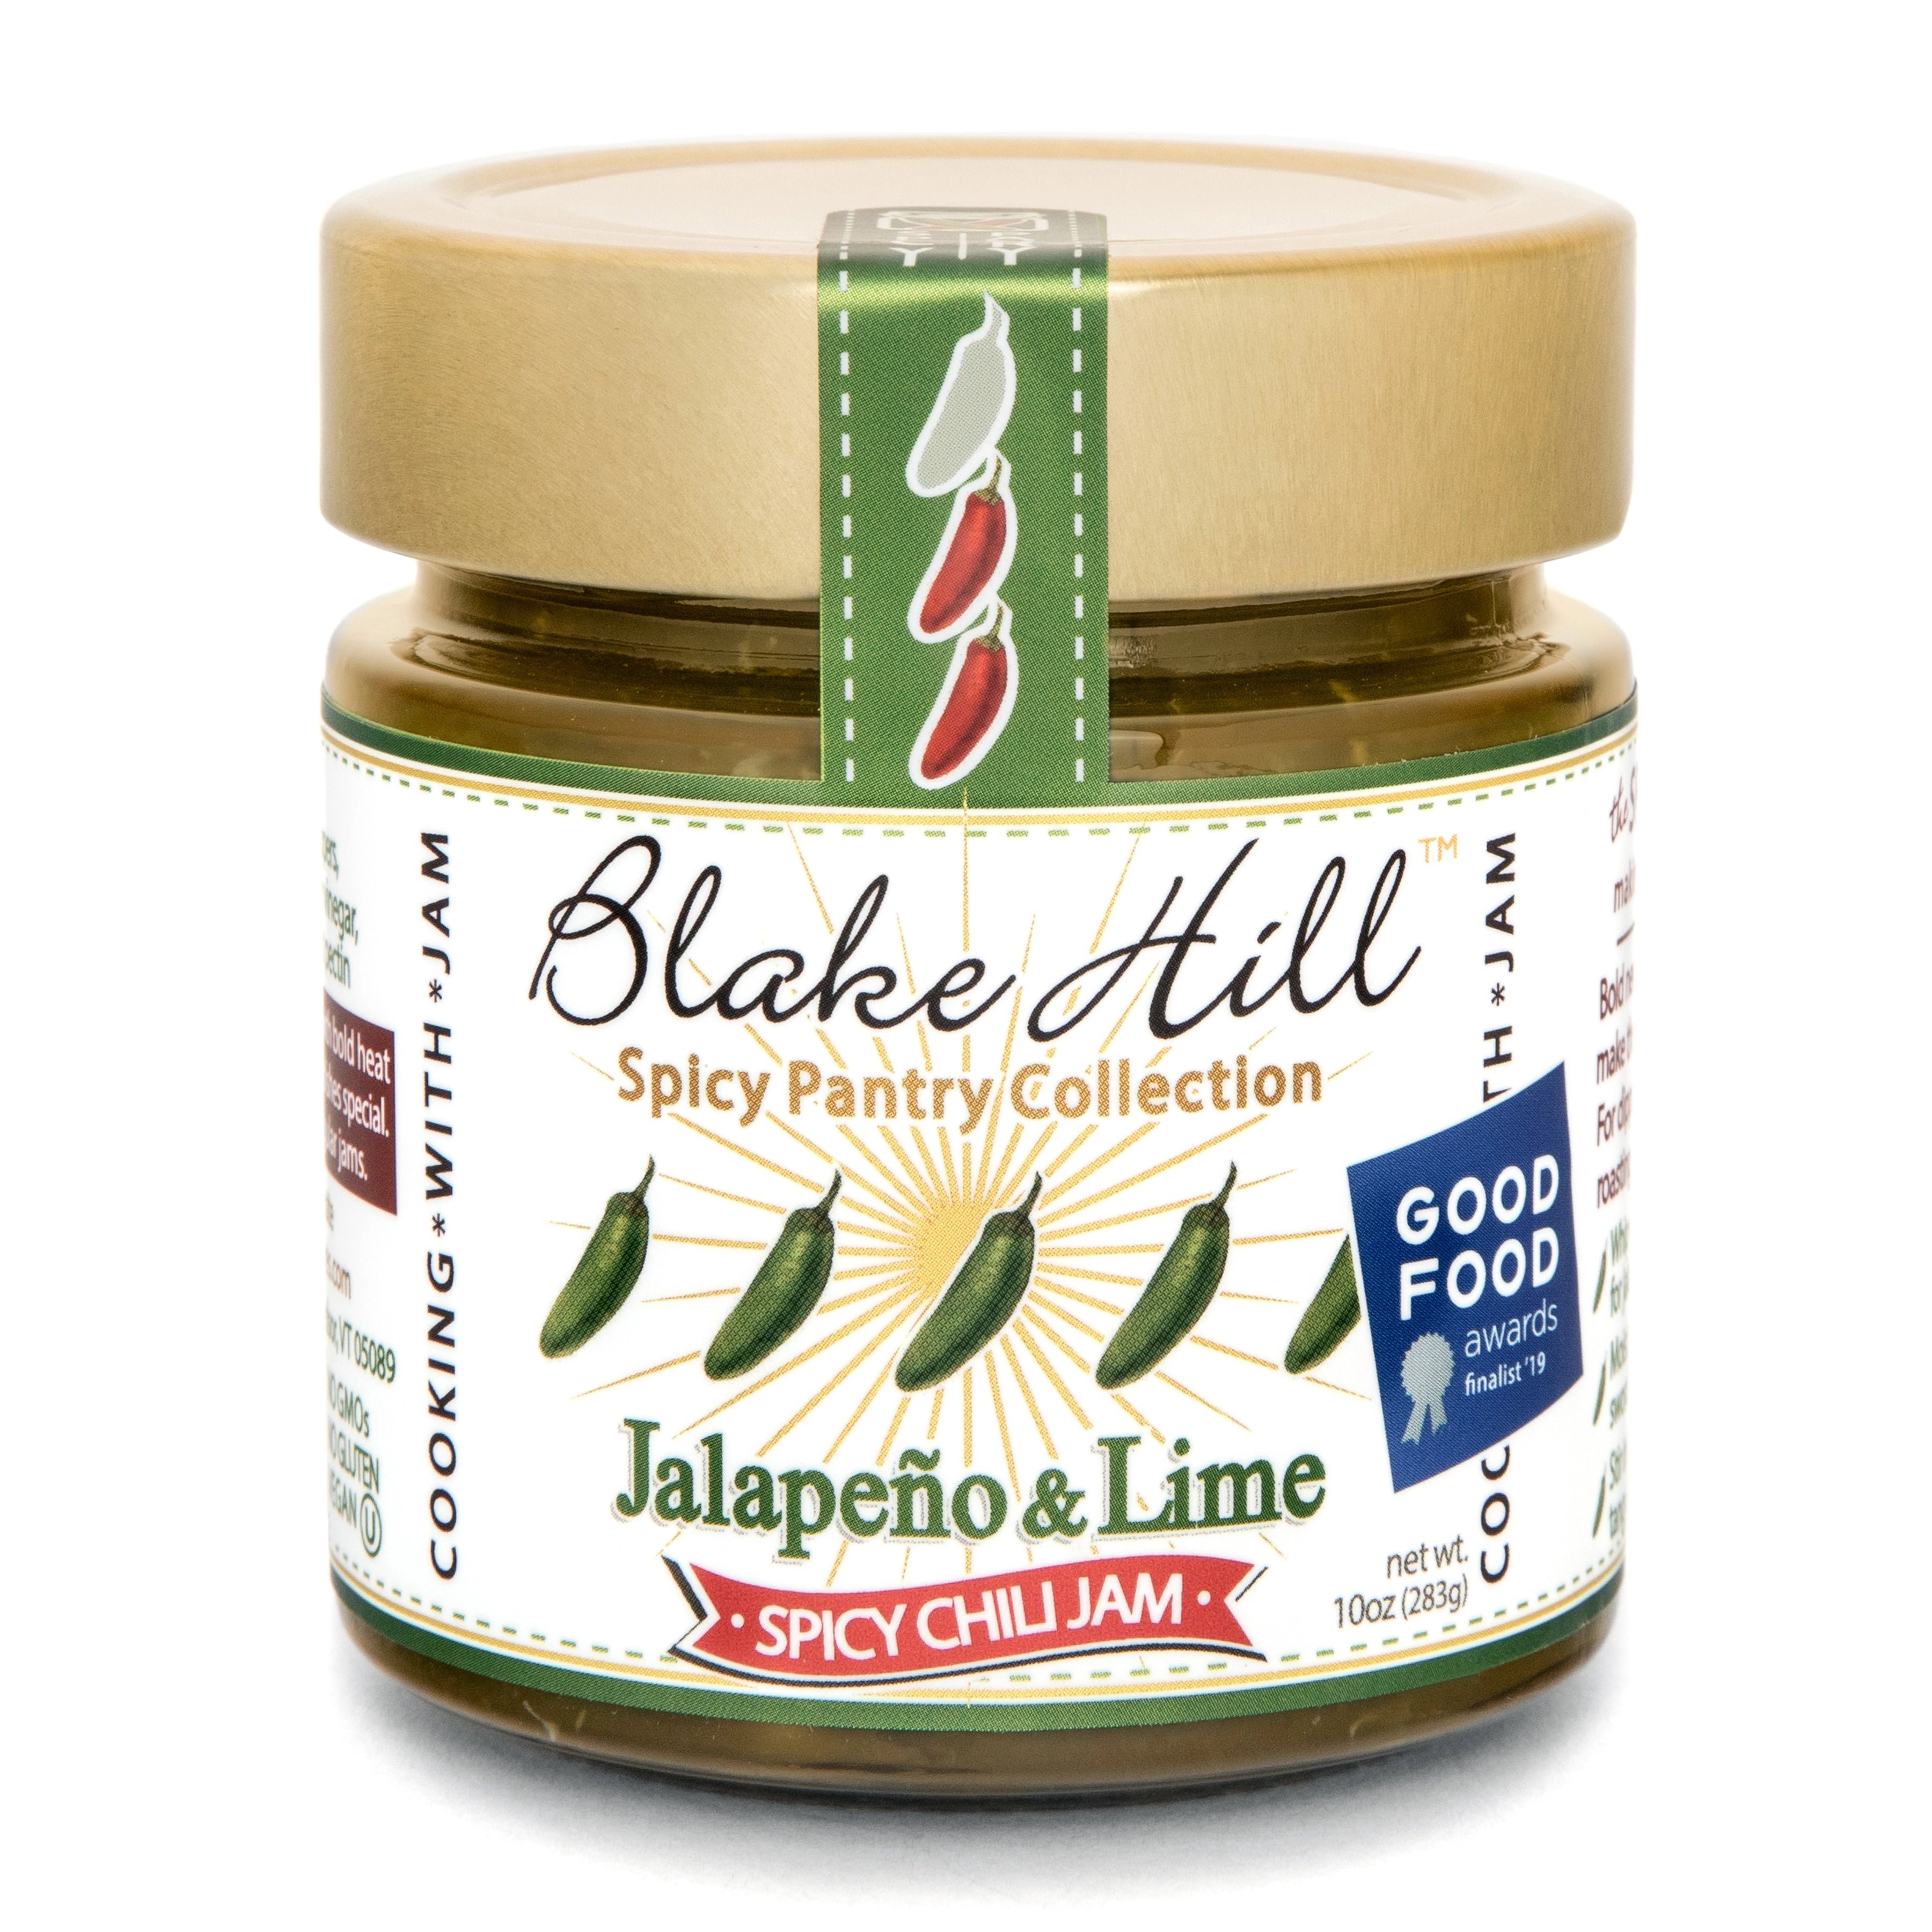 Blake Hill Preserves Jalapeno & Lime Spicy Chili jam in a glass jar.